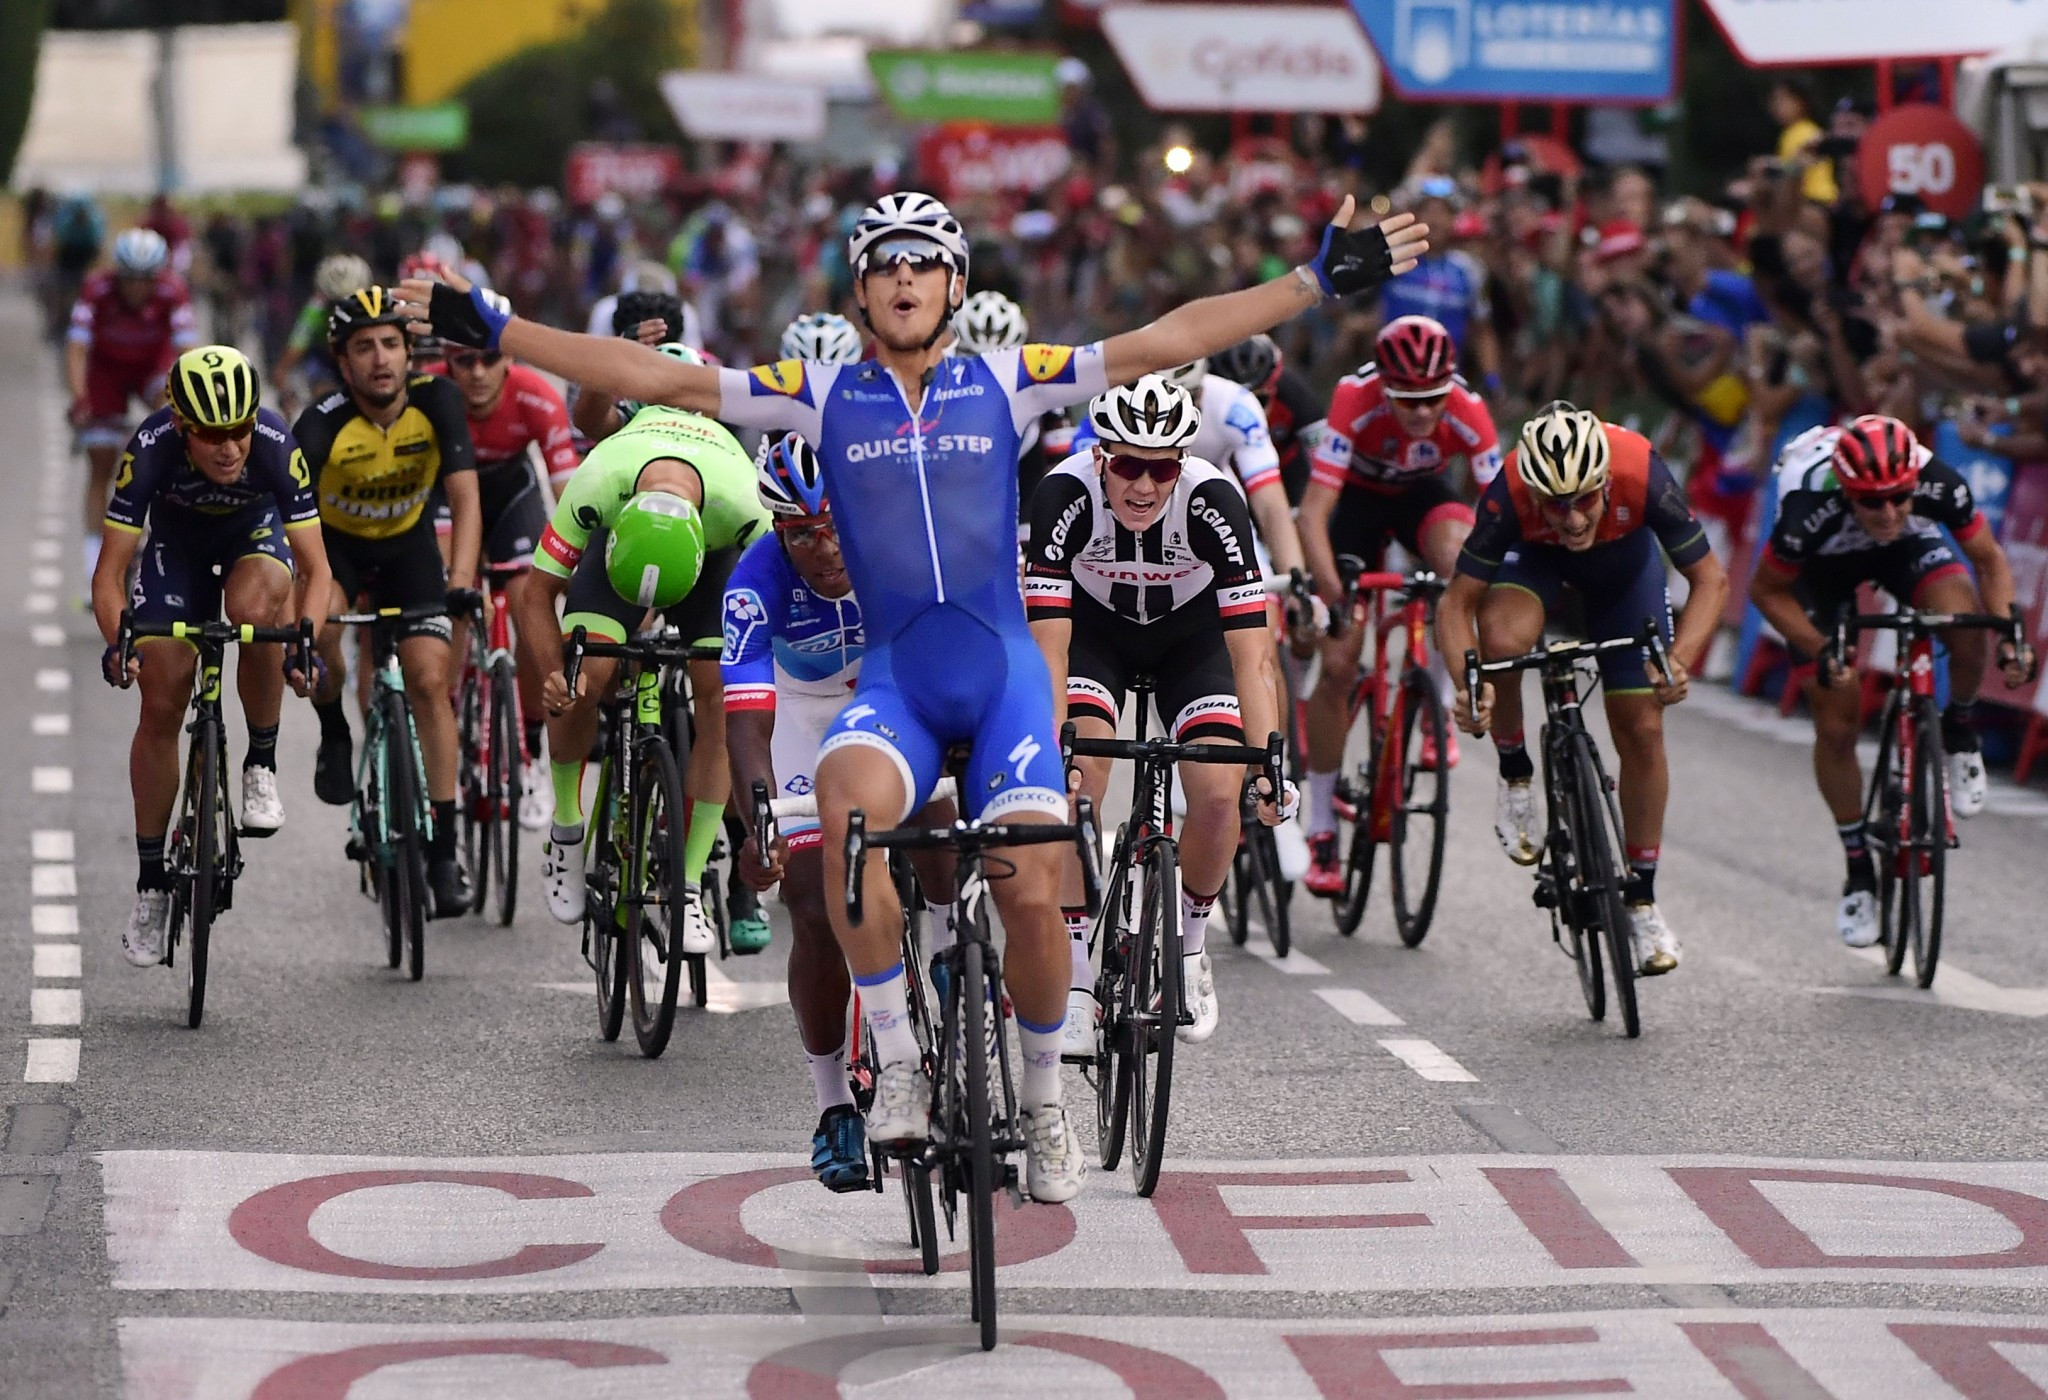 Matteo Trentin triumphed on the final stage but missed out on the points jersey ©Getty Images